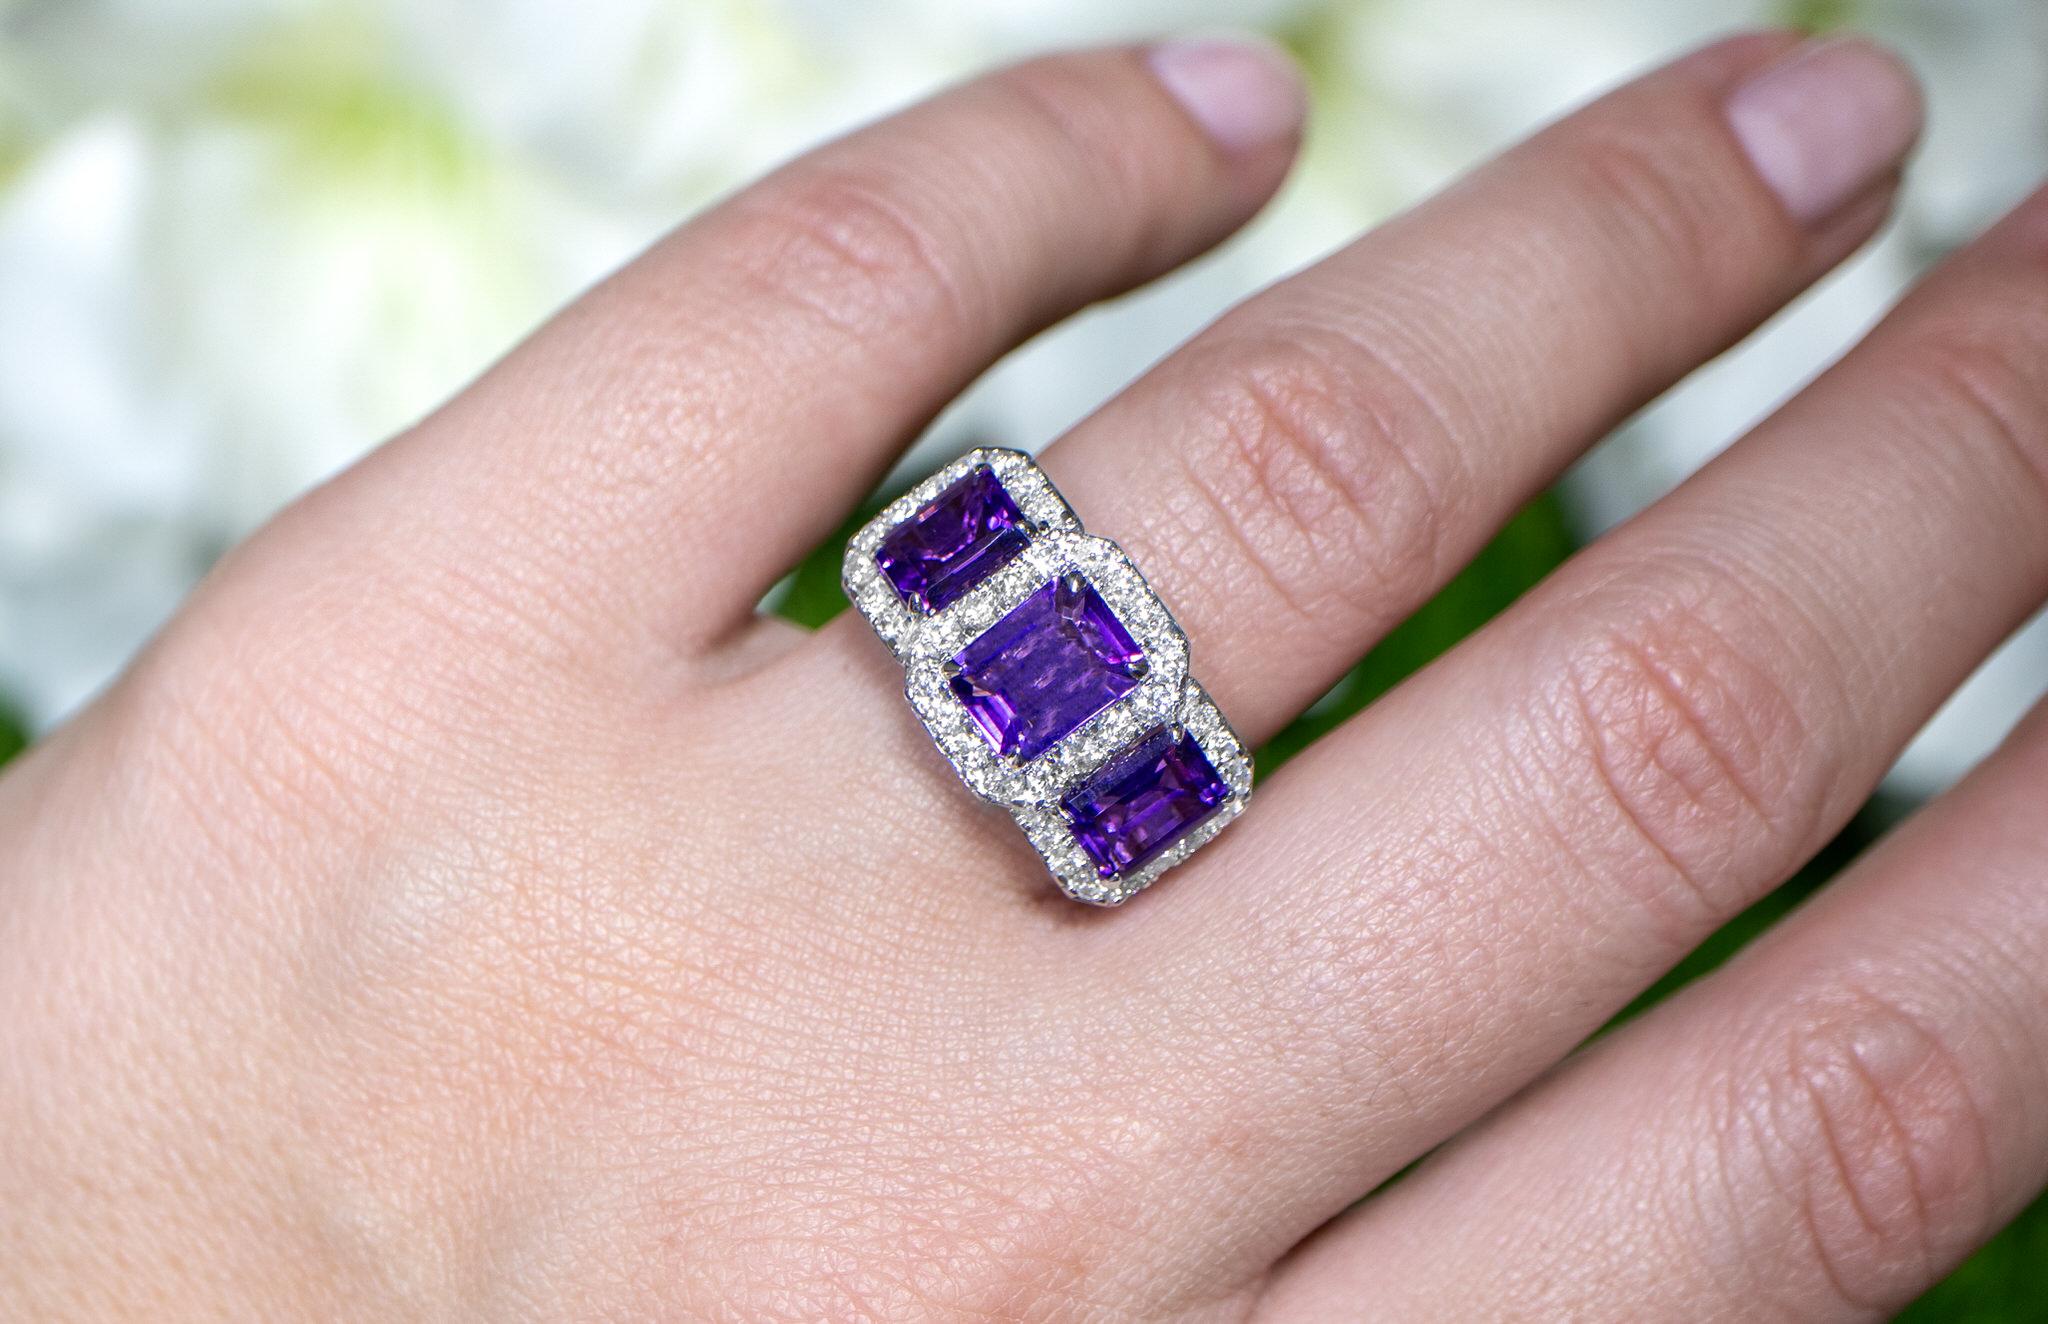 It comes with the Gemological Appraisal by GIA GG/AJP
All Gemstones are Natural
Amethysts = 3.13 Carats
Diamonds = 0.79 Carats
Metal: 18K White Gold
Ring Size: 6.5* US
*It can be resized complimentary